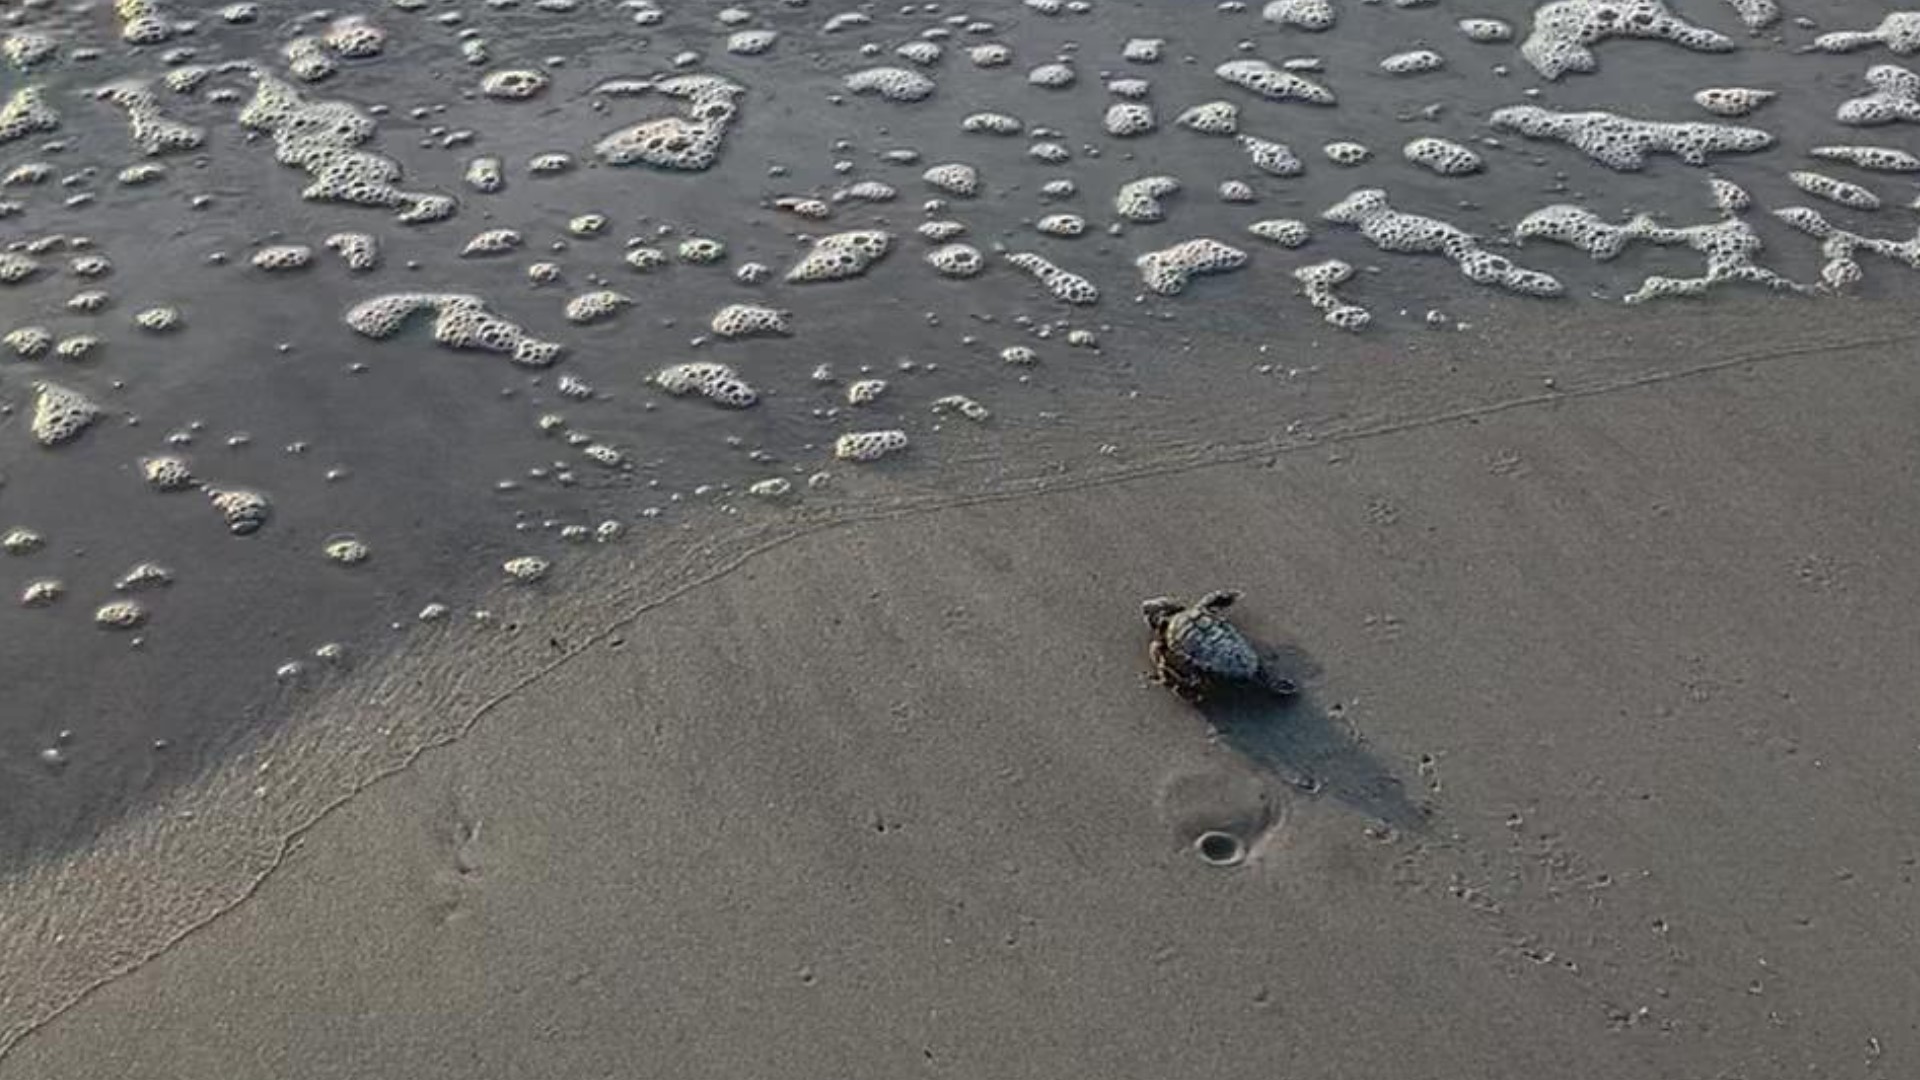 This little guy made his way out to the ocean after hatching at Mickler's Landing. Video courtesy of Abby Kuhn.